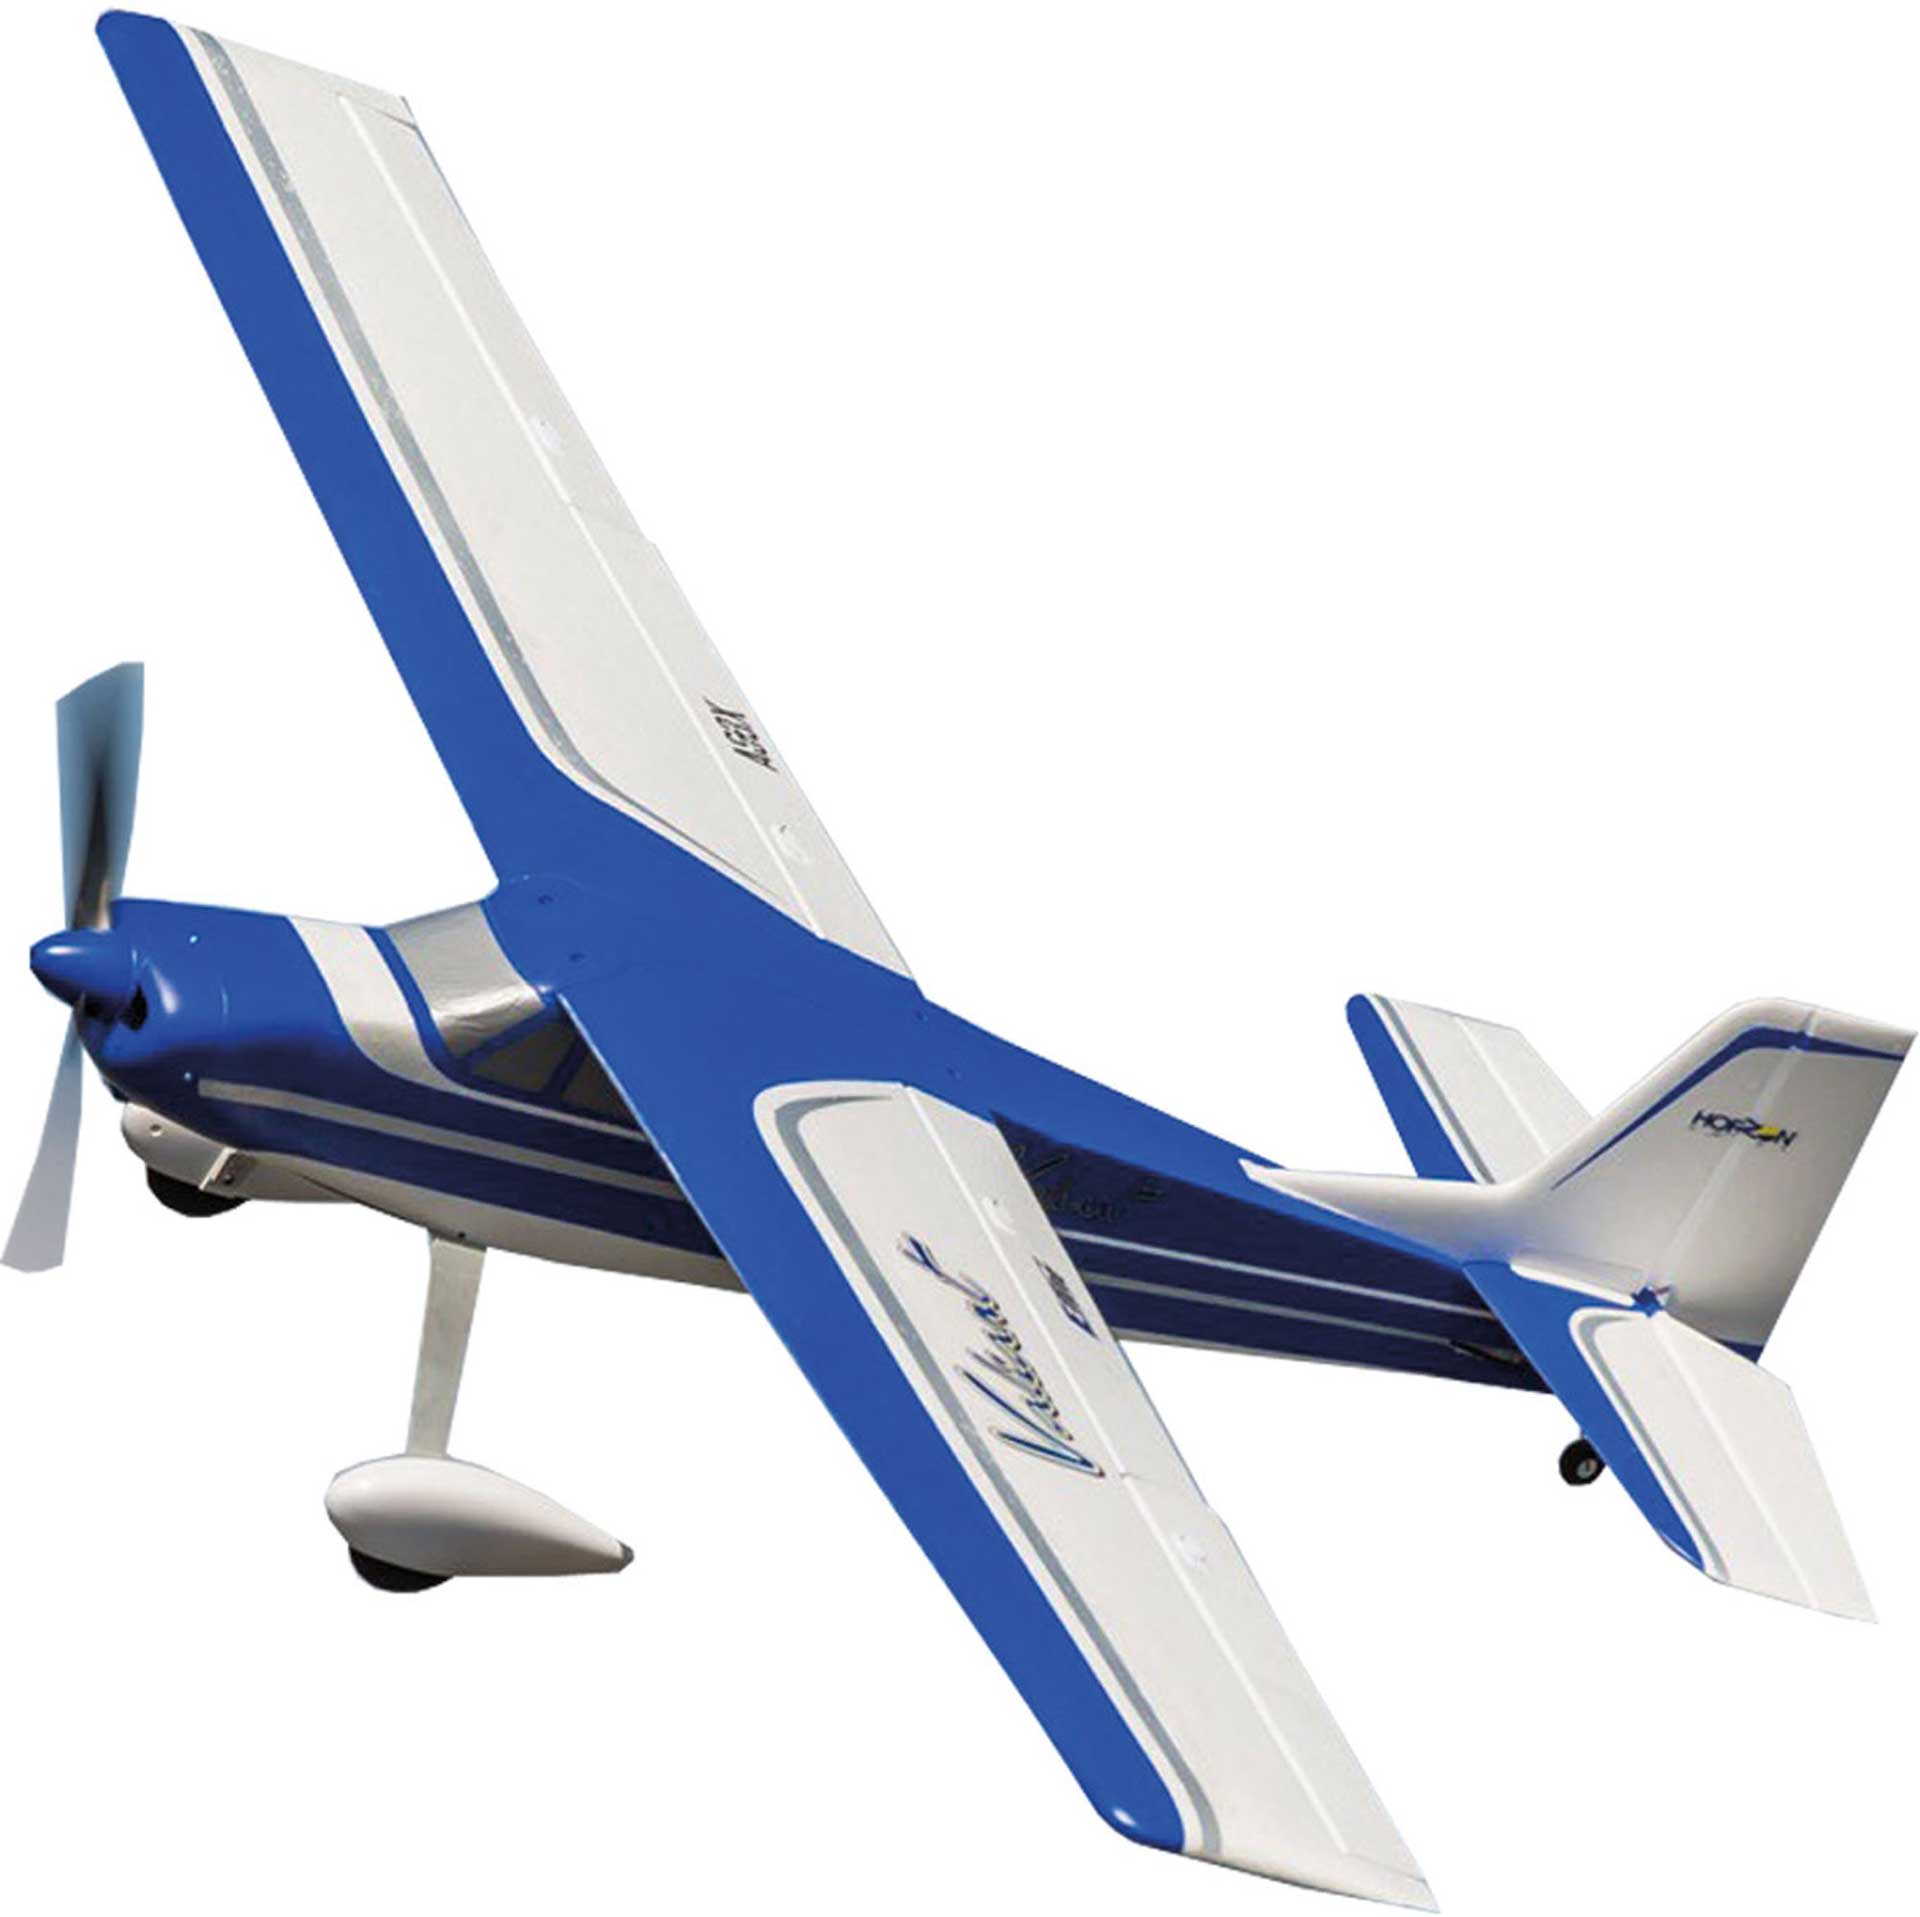 E-FLITE Valiant 1.3M BNF Basic with SAFE & AS3X